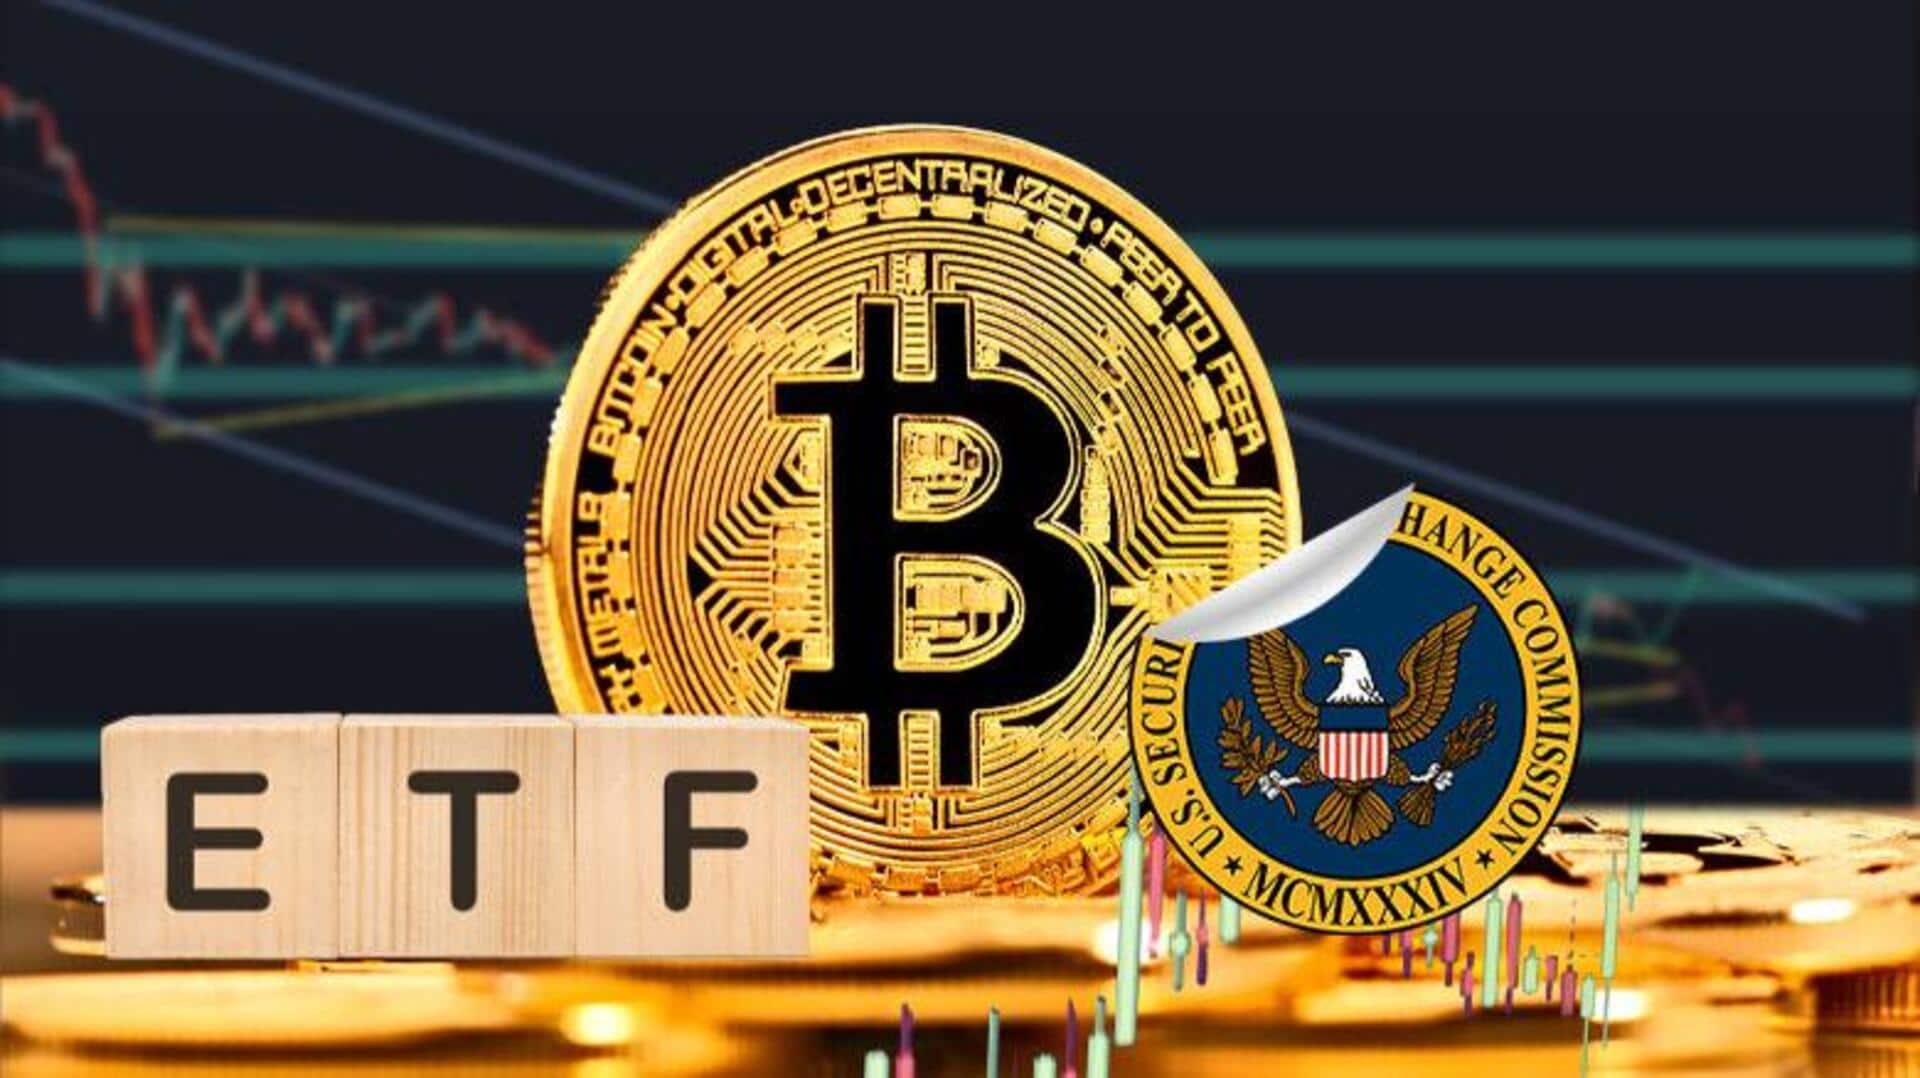 SEC's X account hijacked to falsely announce Bitcoin ETF approval